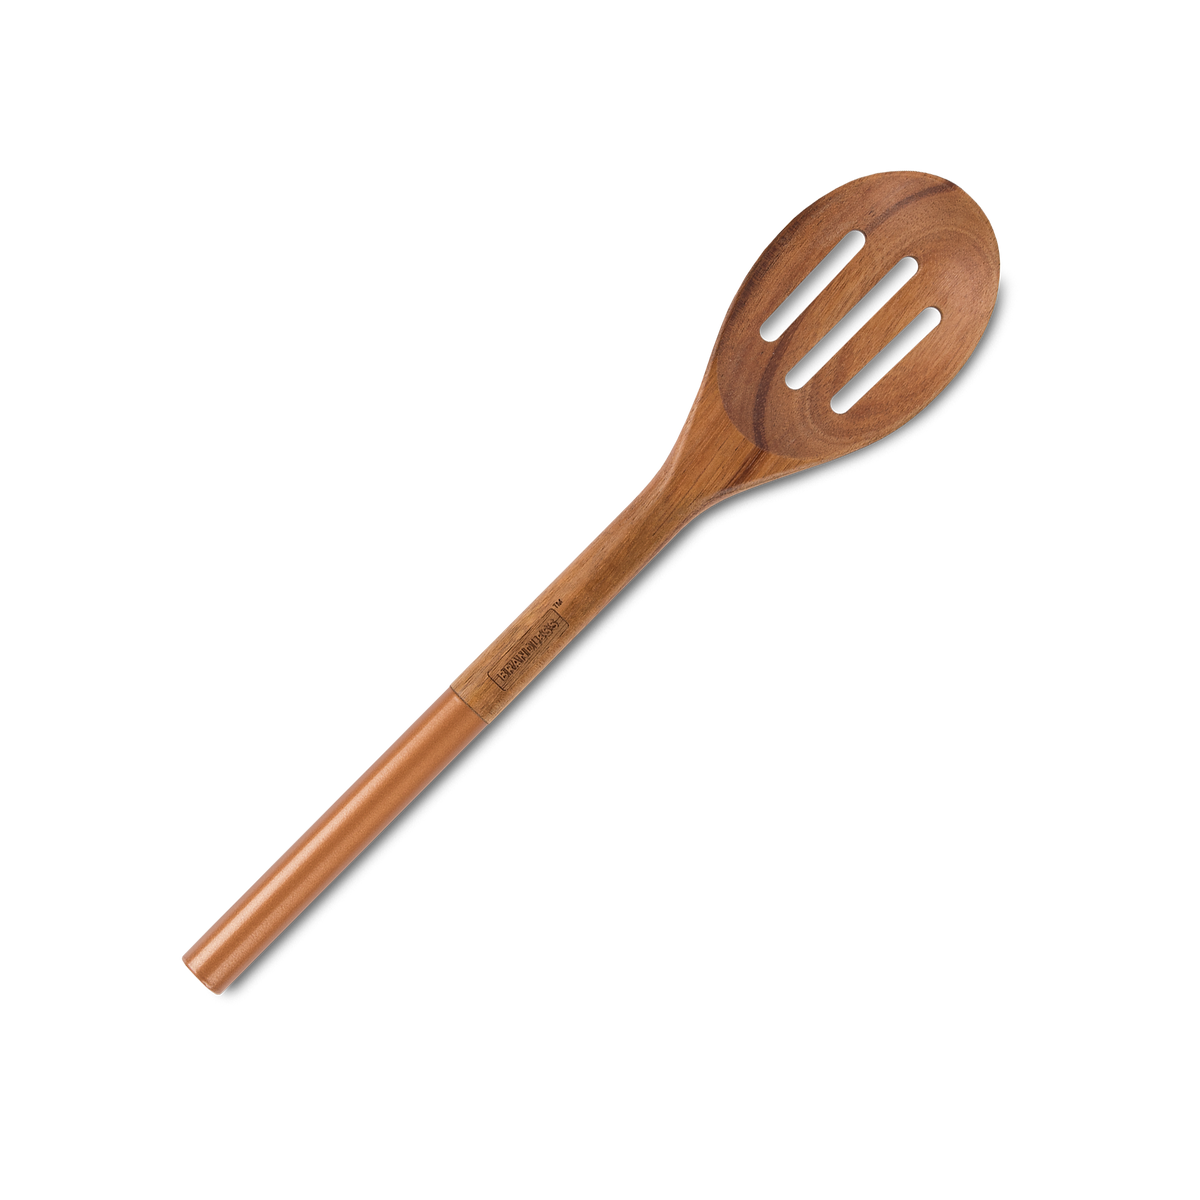 Product photo, acacia wood slotted serving spoon with copper color handle cap.